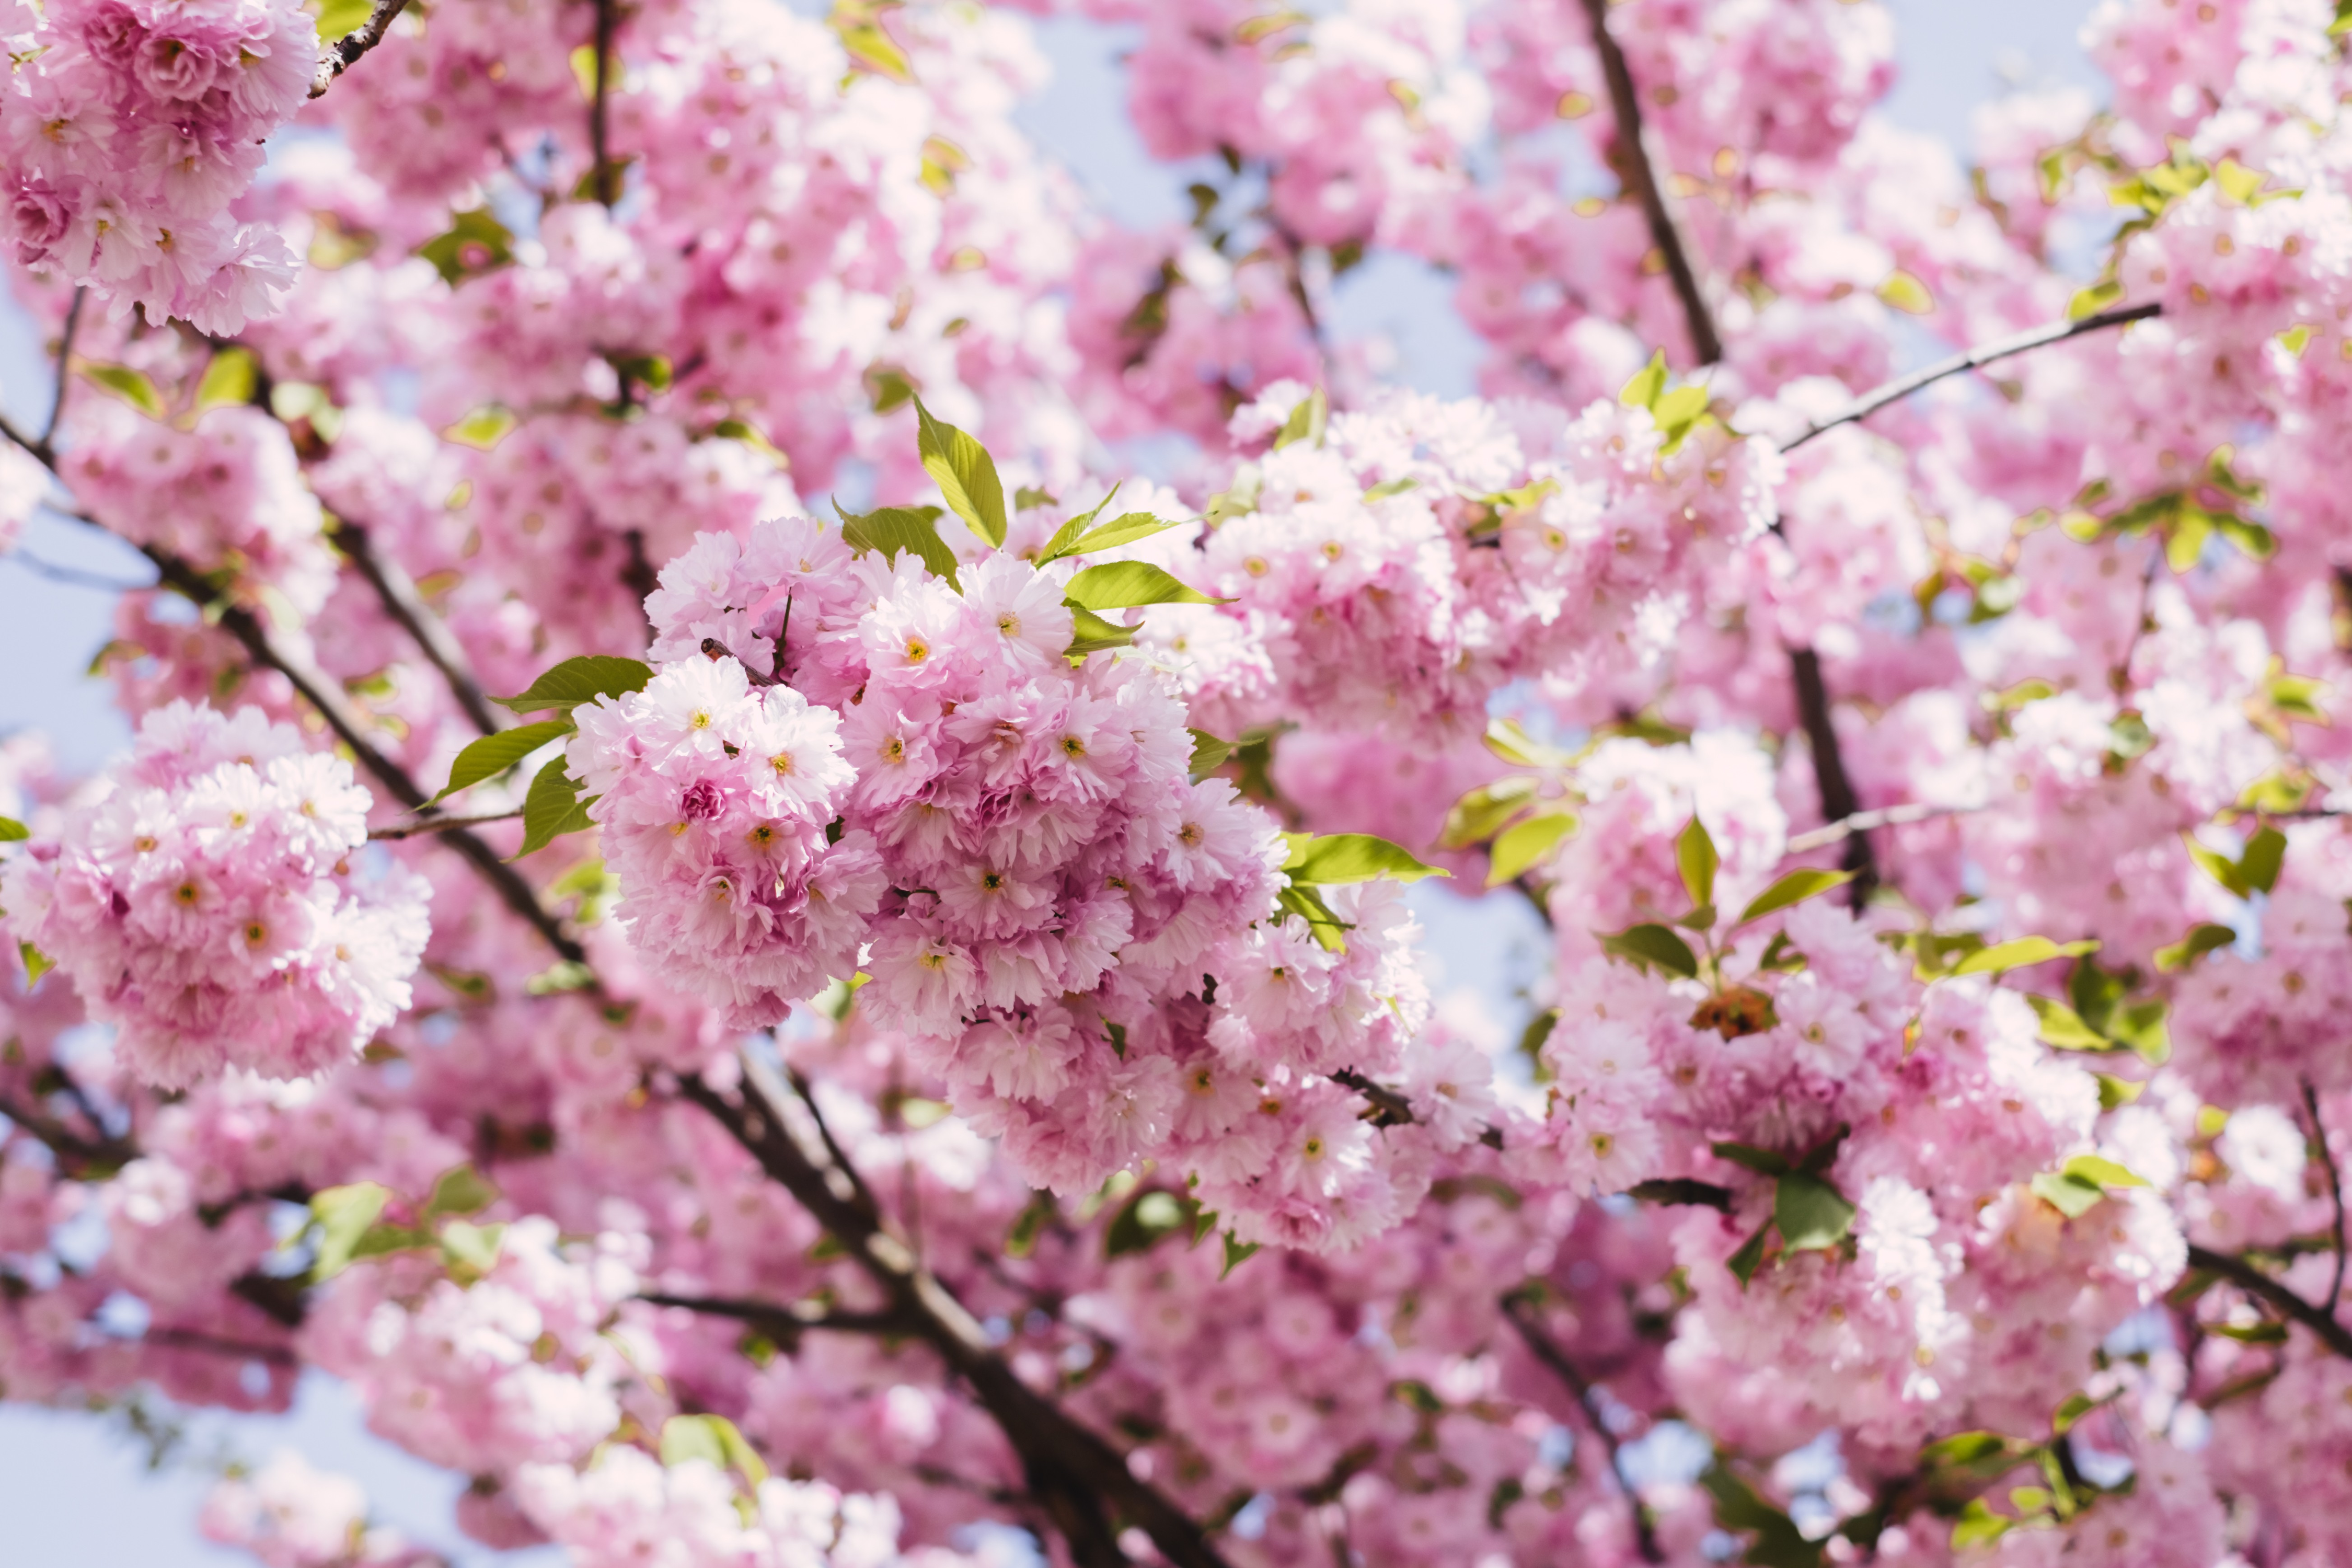 Halifax Has It's Own Iconic Cherry Blossom Row To Visit This Spring!